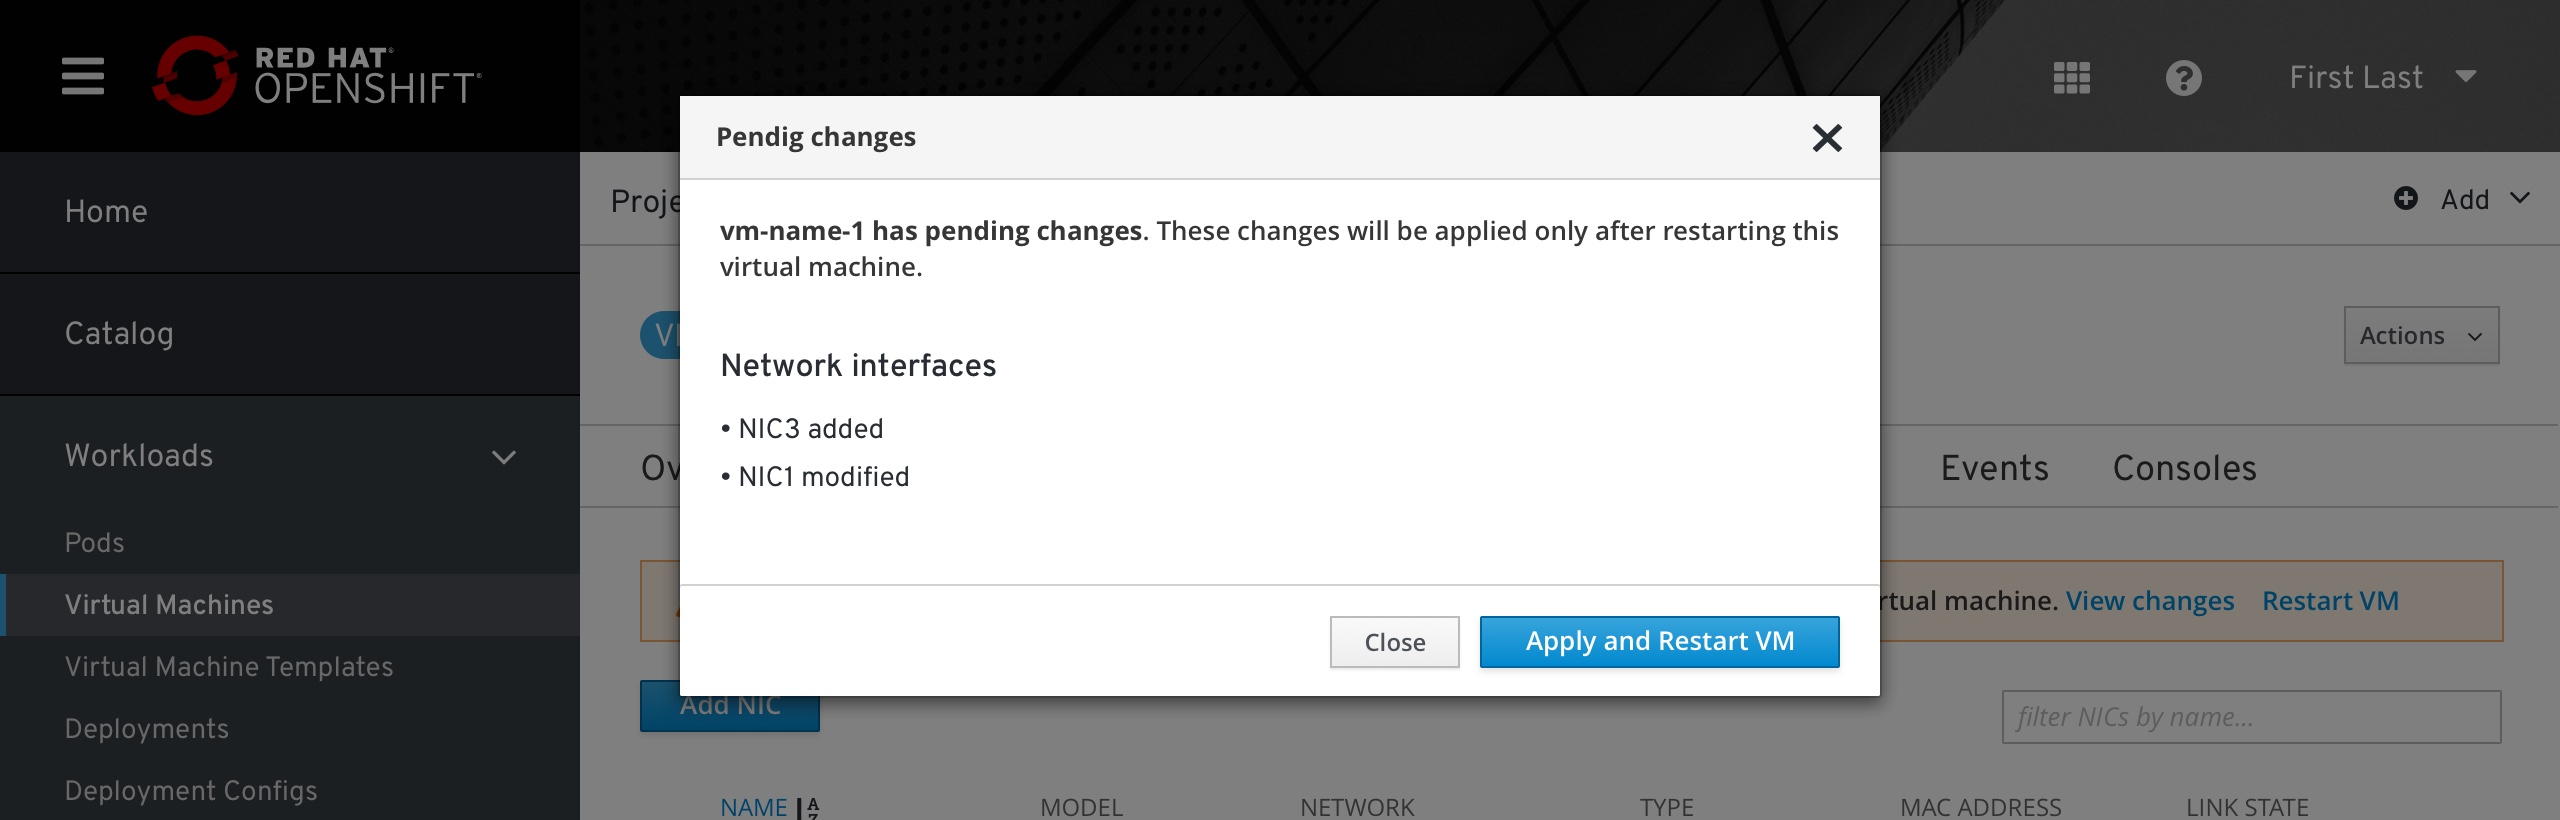 VM - Pending changes notification - view changes modal